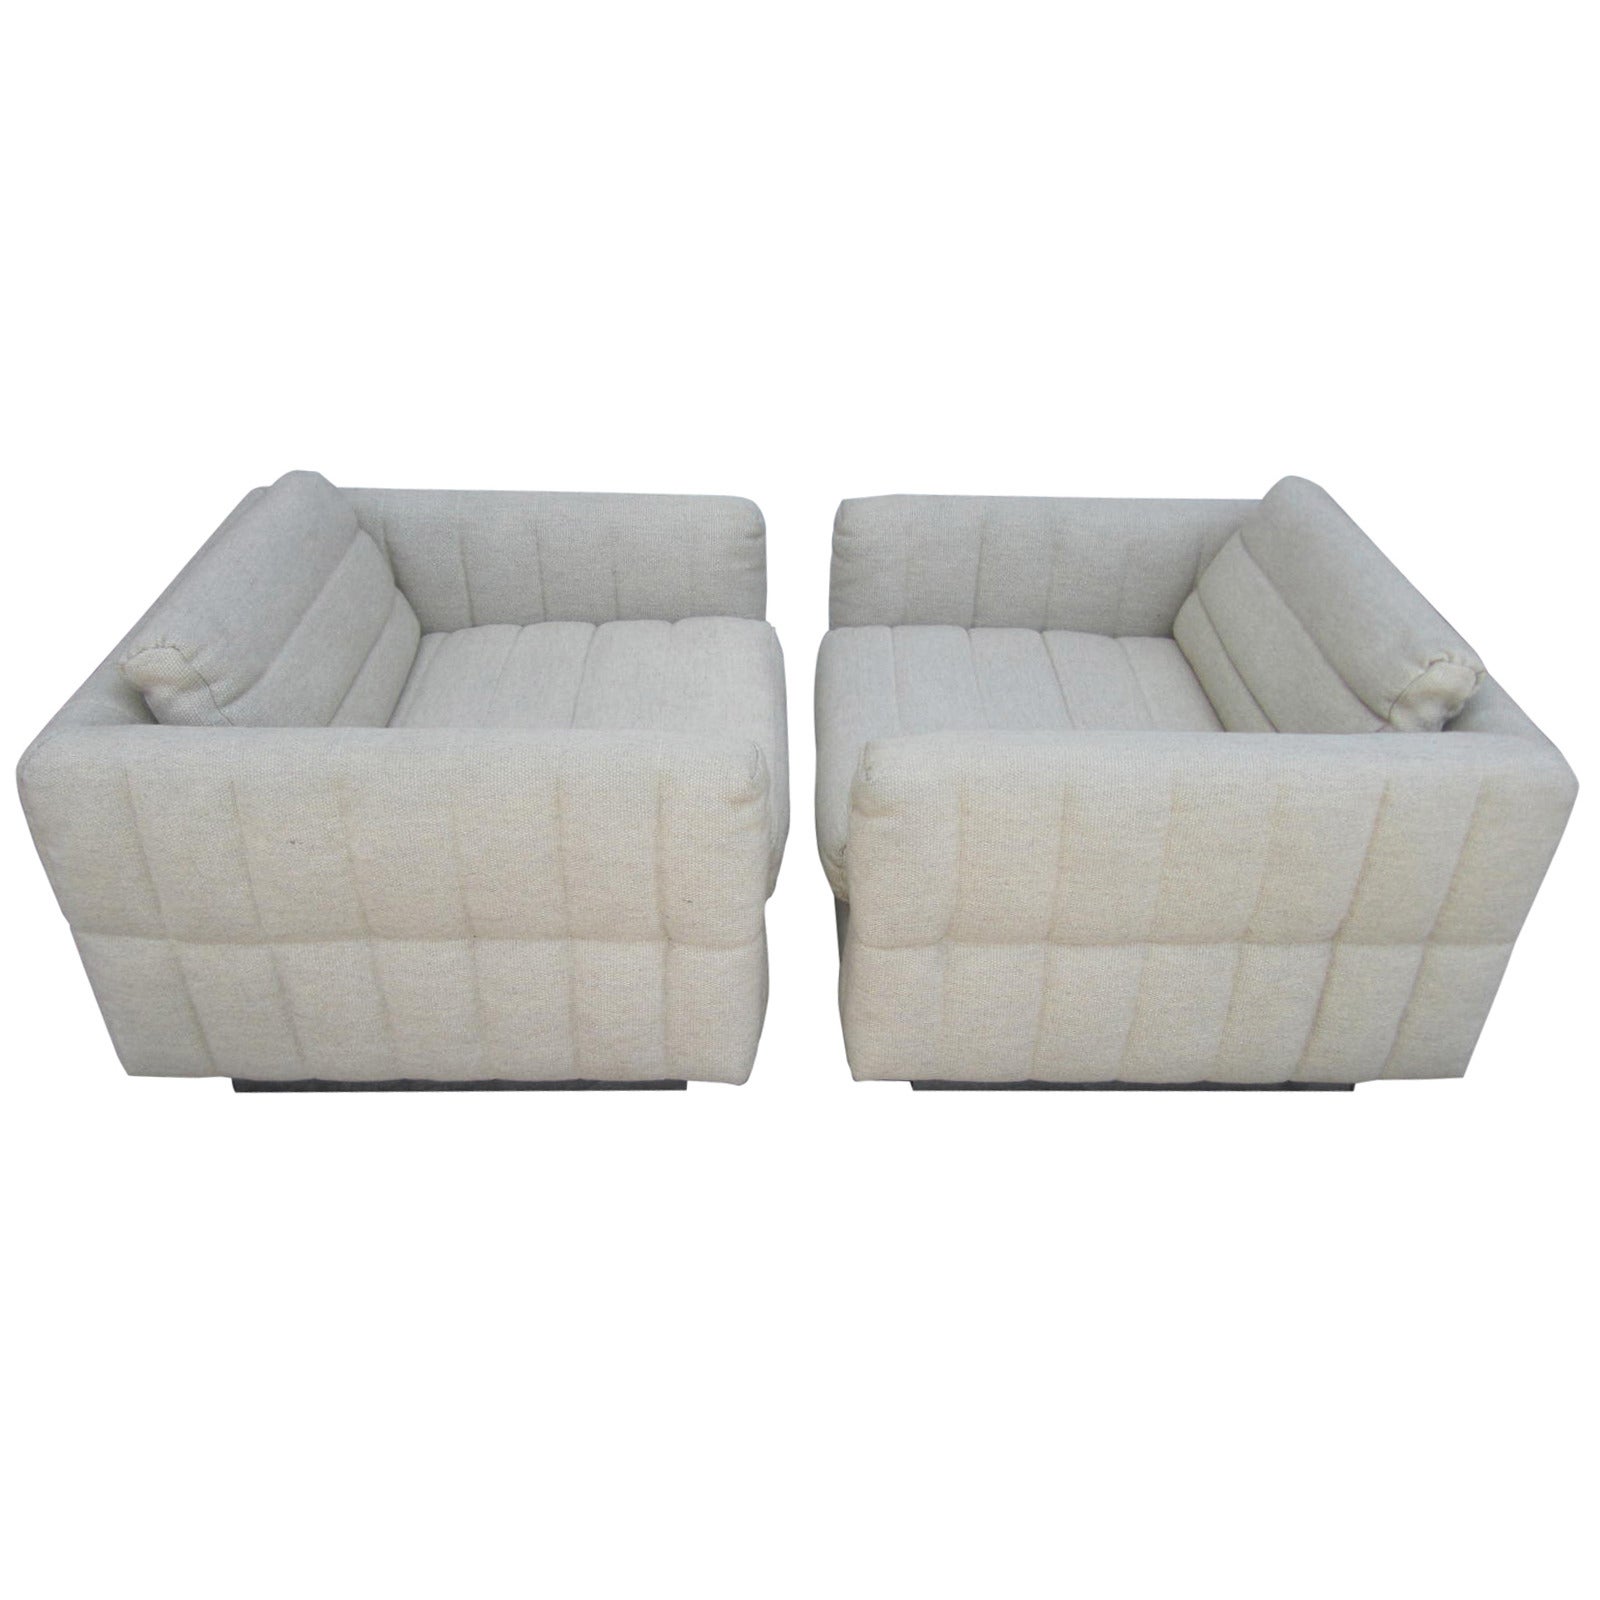 Lovely Pair of Channel Tufted Milo Baughman Cube Chairs Chrome Base Mid-Century For Sale